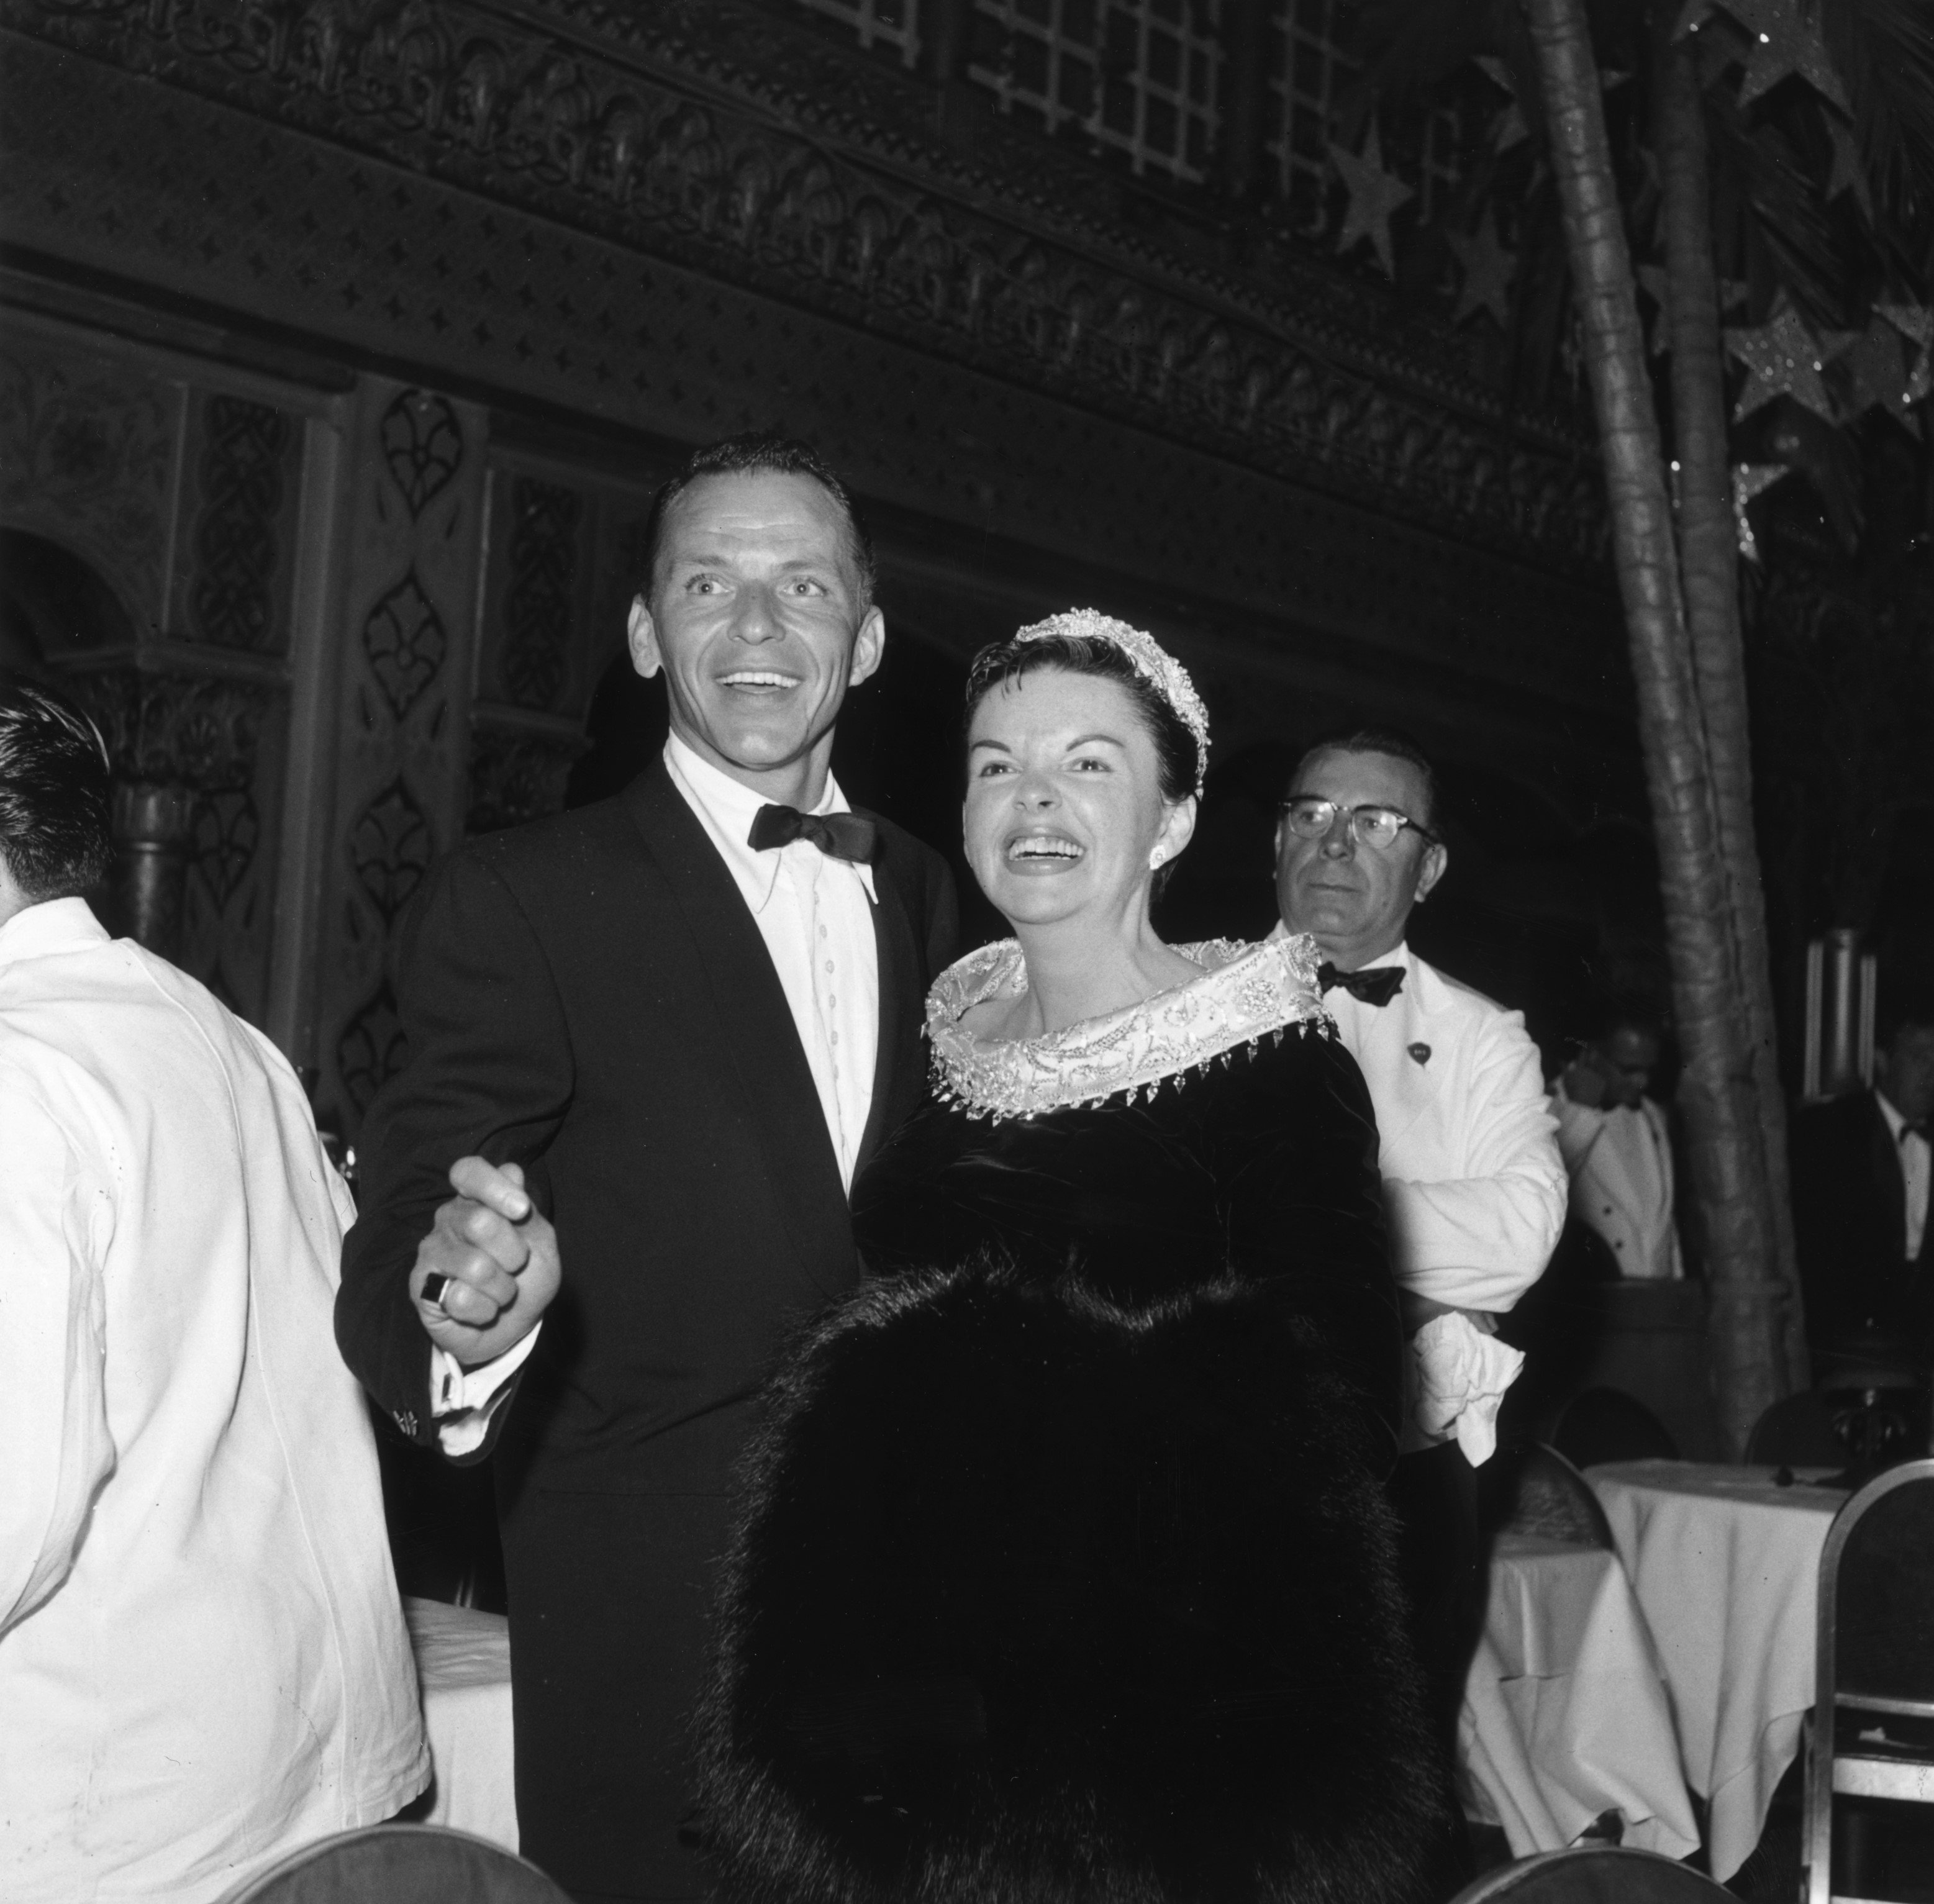 Frank Sinatra wears a suit and Judy Garland wears a black dress with a white collar. They stand together and smile.